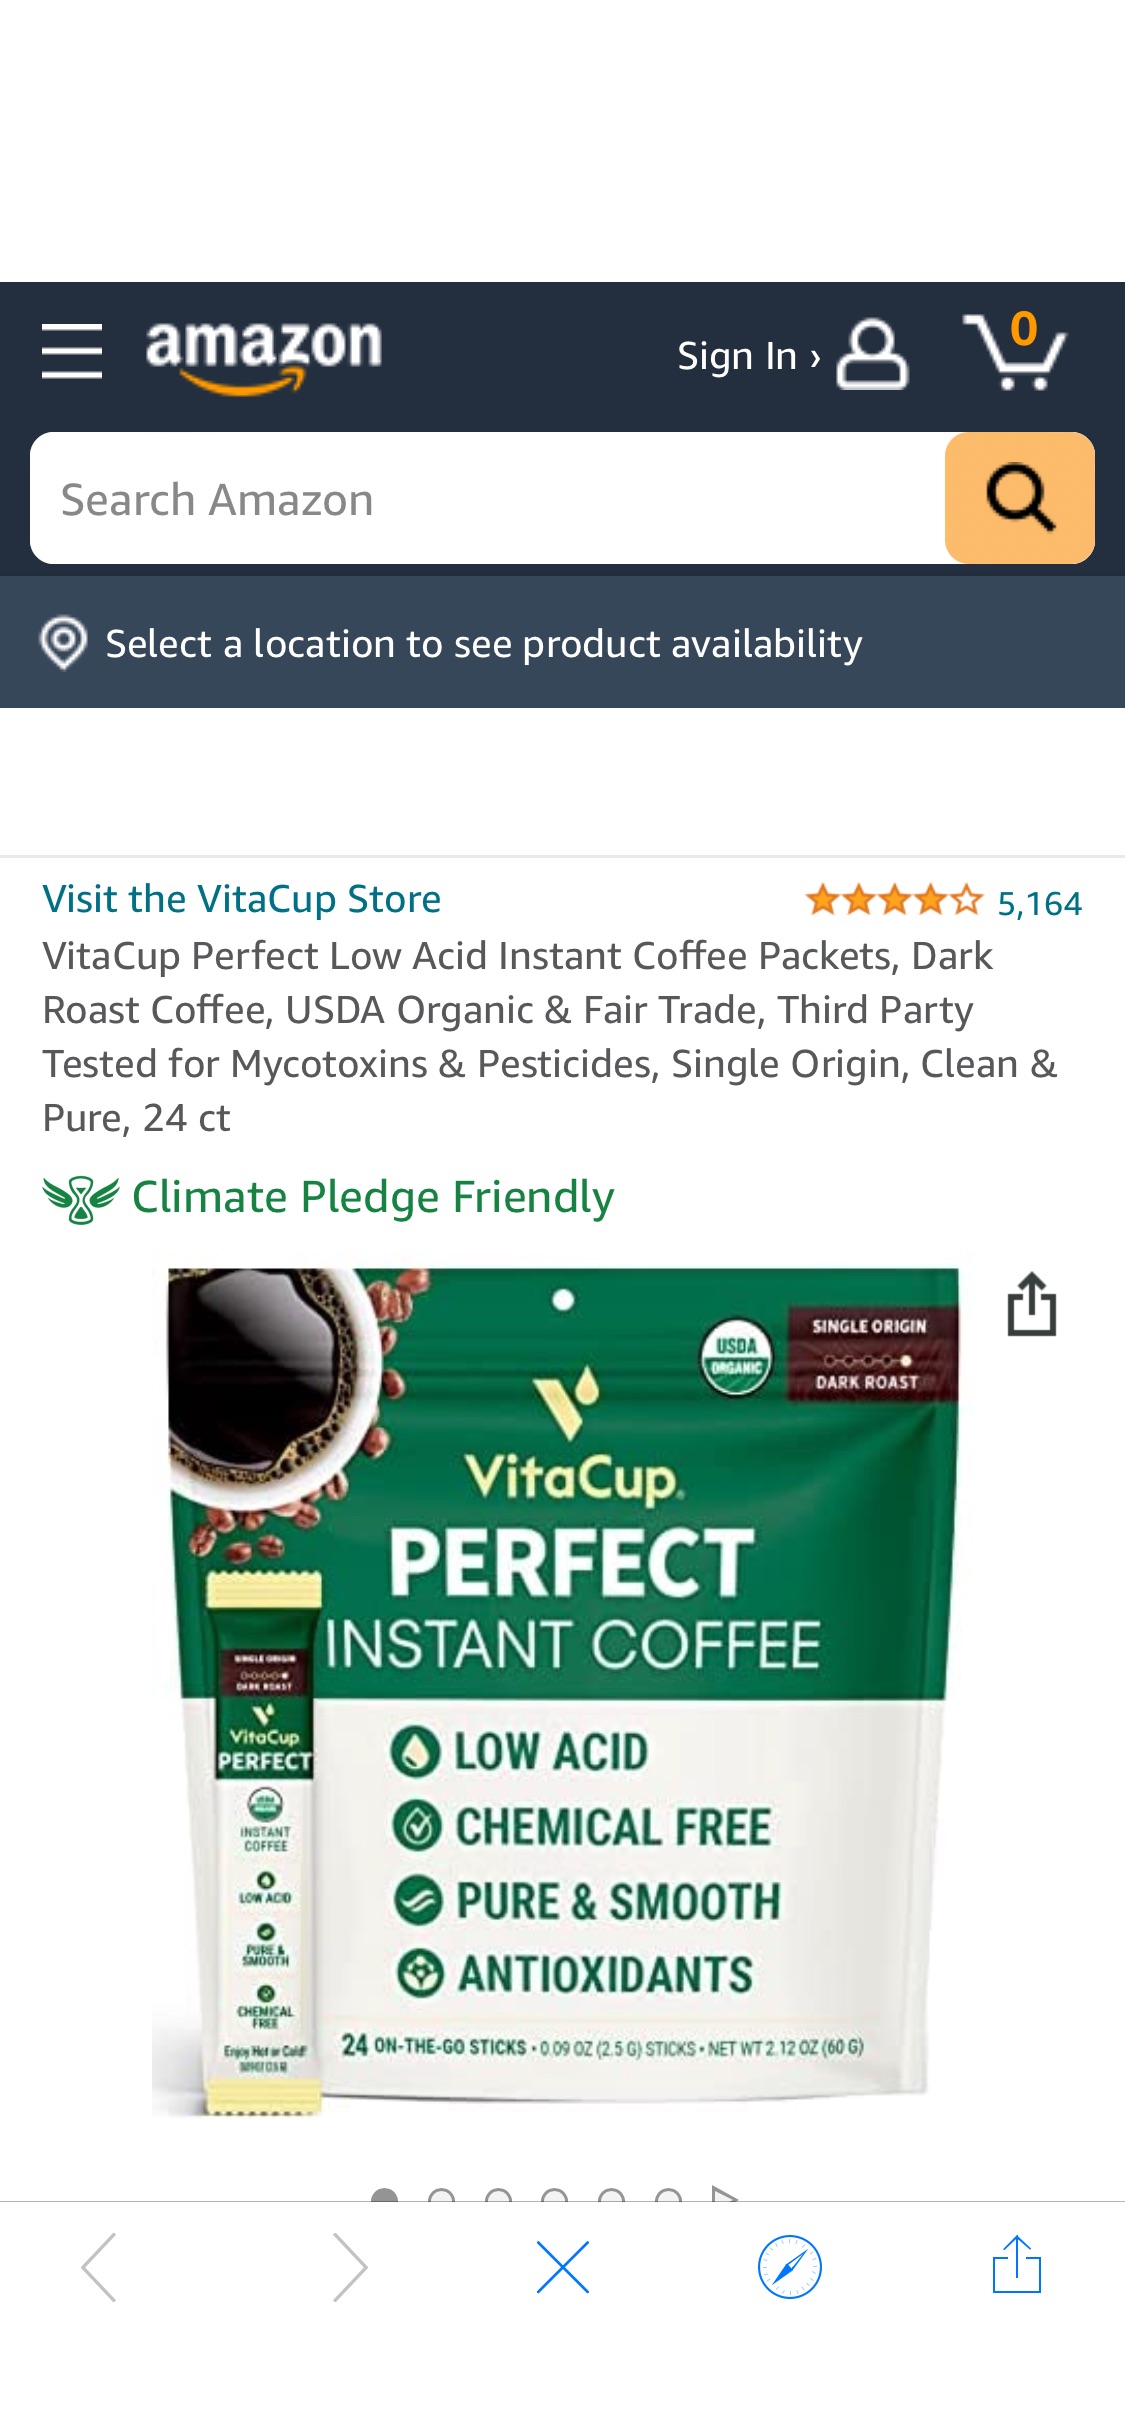 VitaCup Perfect Low Acid Instant Coffee Packets, Dark Roast Coffee, USDA Organic & Fair Trade, Third Party Tested for Mycotoxins & Pesticides, Single Origin, Clean & Pure, 24 ct